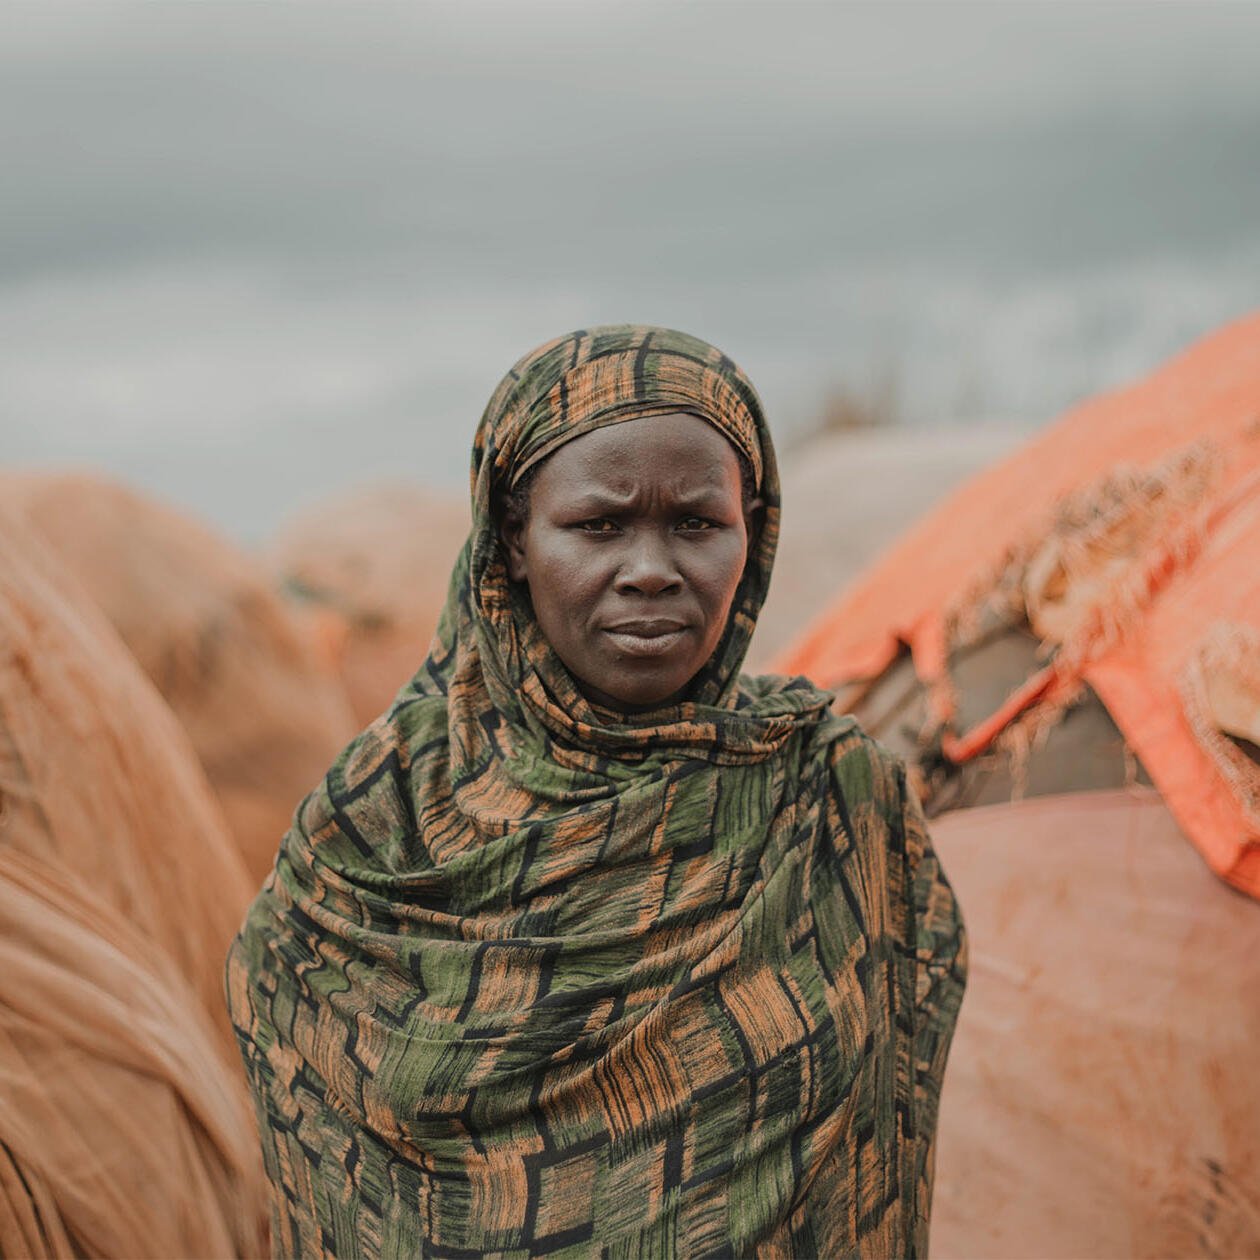 Portrait of a woman standing in front of a series of huts in the Somali desert.